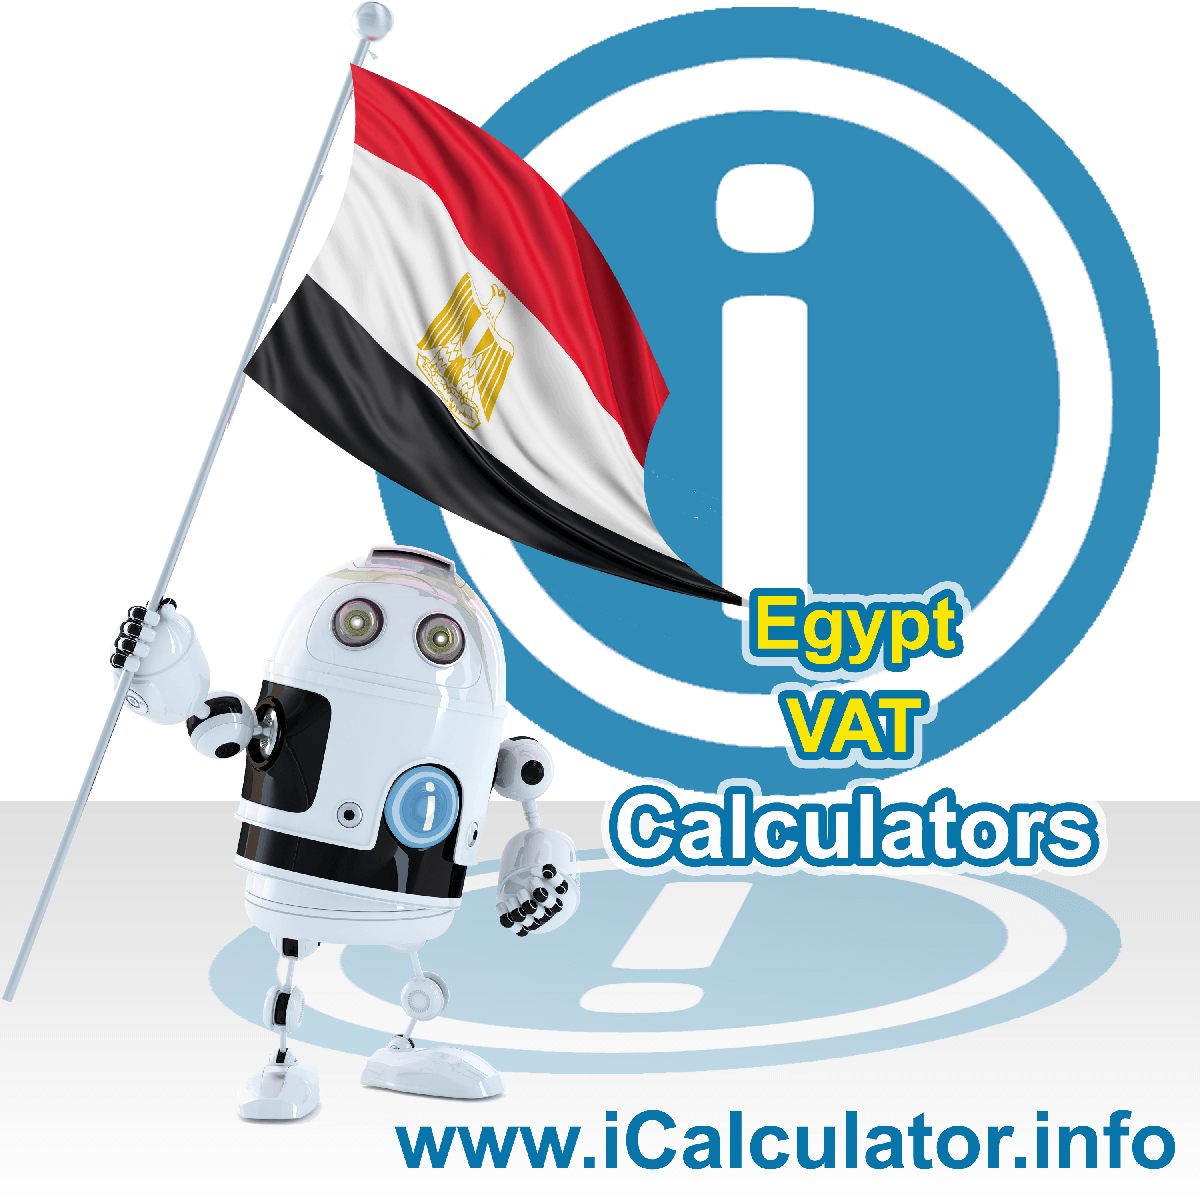 Egypt VAT Calculator. This image shows the Egypt flag and information relating to the VAT formula used for calculating Value Added Tax in Egypt using the Egypt VAT Calculator in 2023